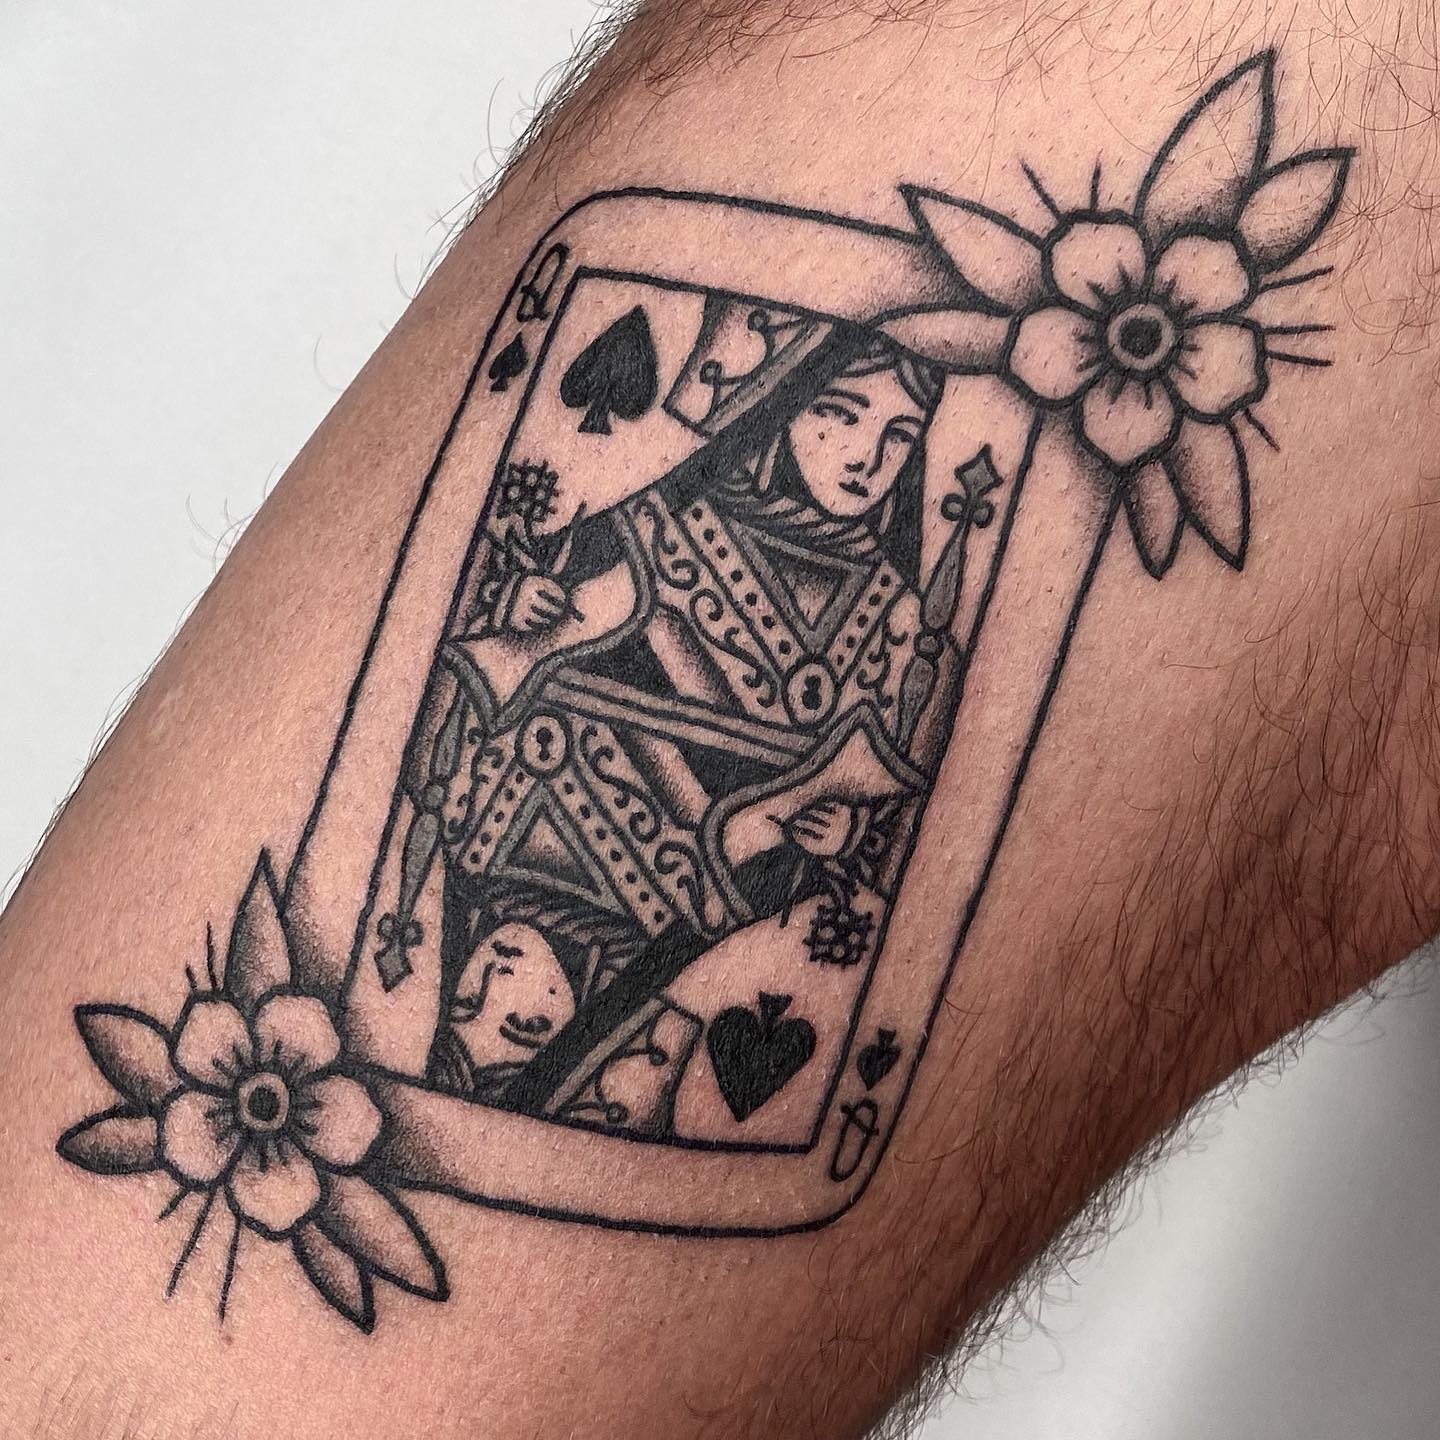 Patrick Kelly on Instagram King of Hearts  King of hearts tattoo Playing  card tattoos Queen of hearts tattoo